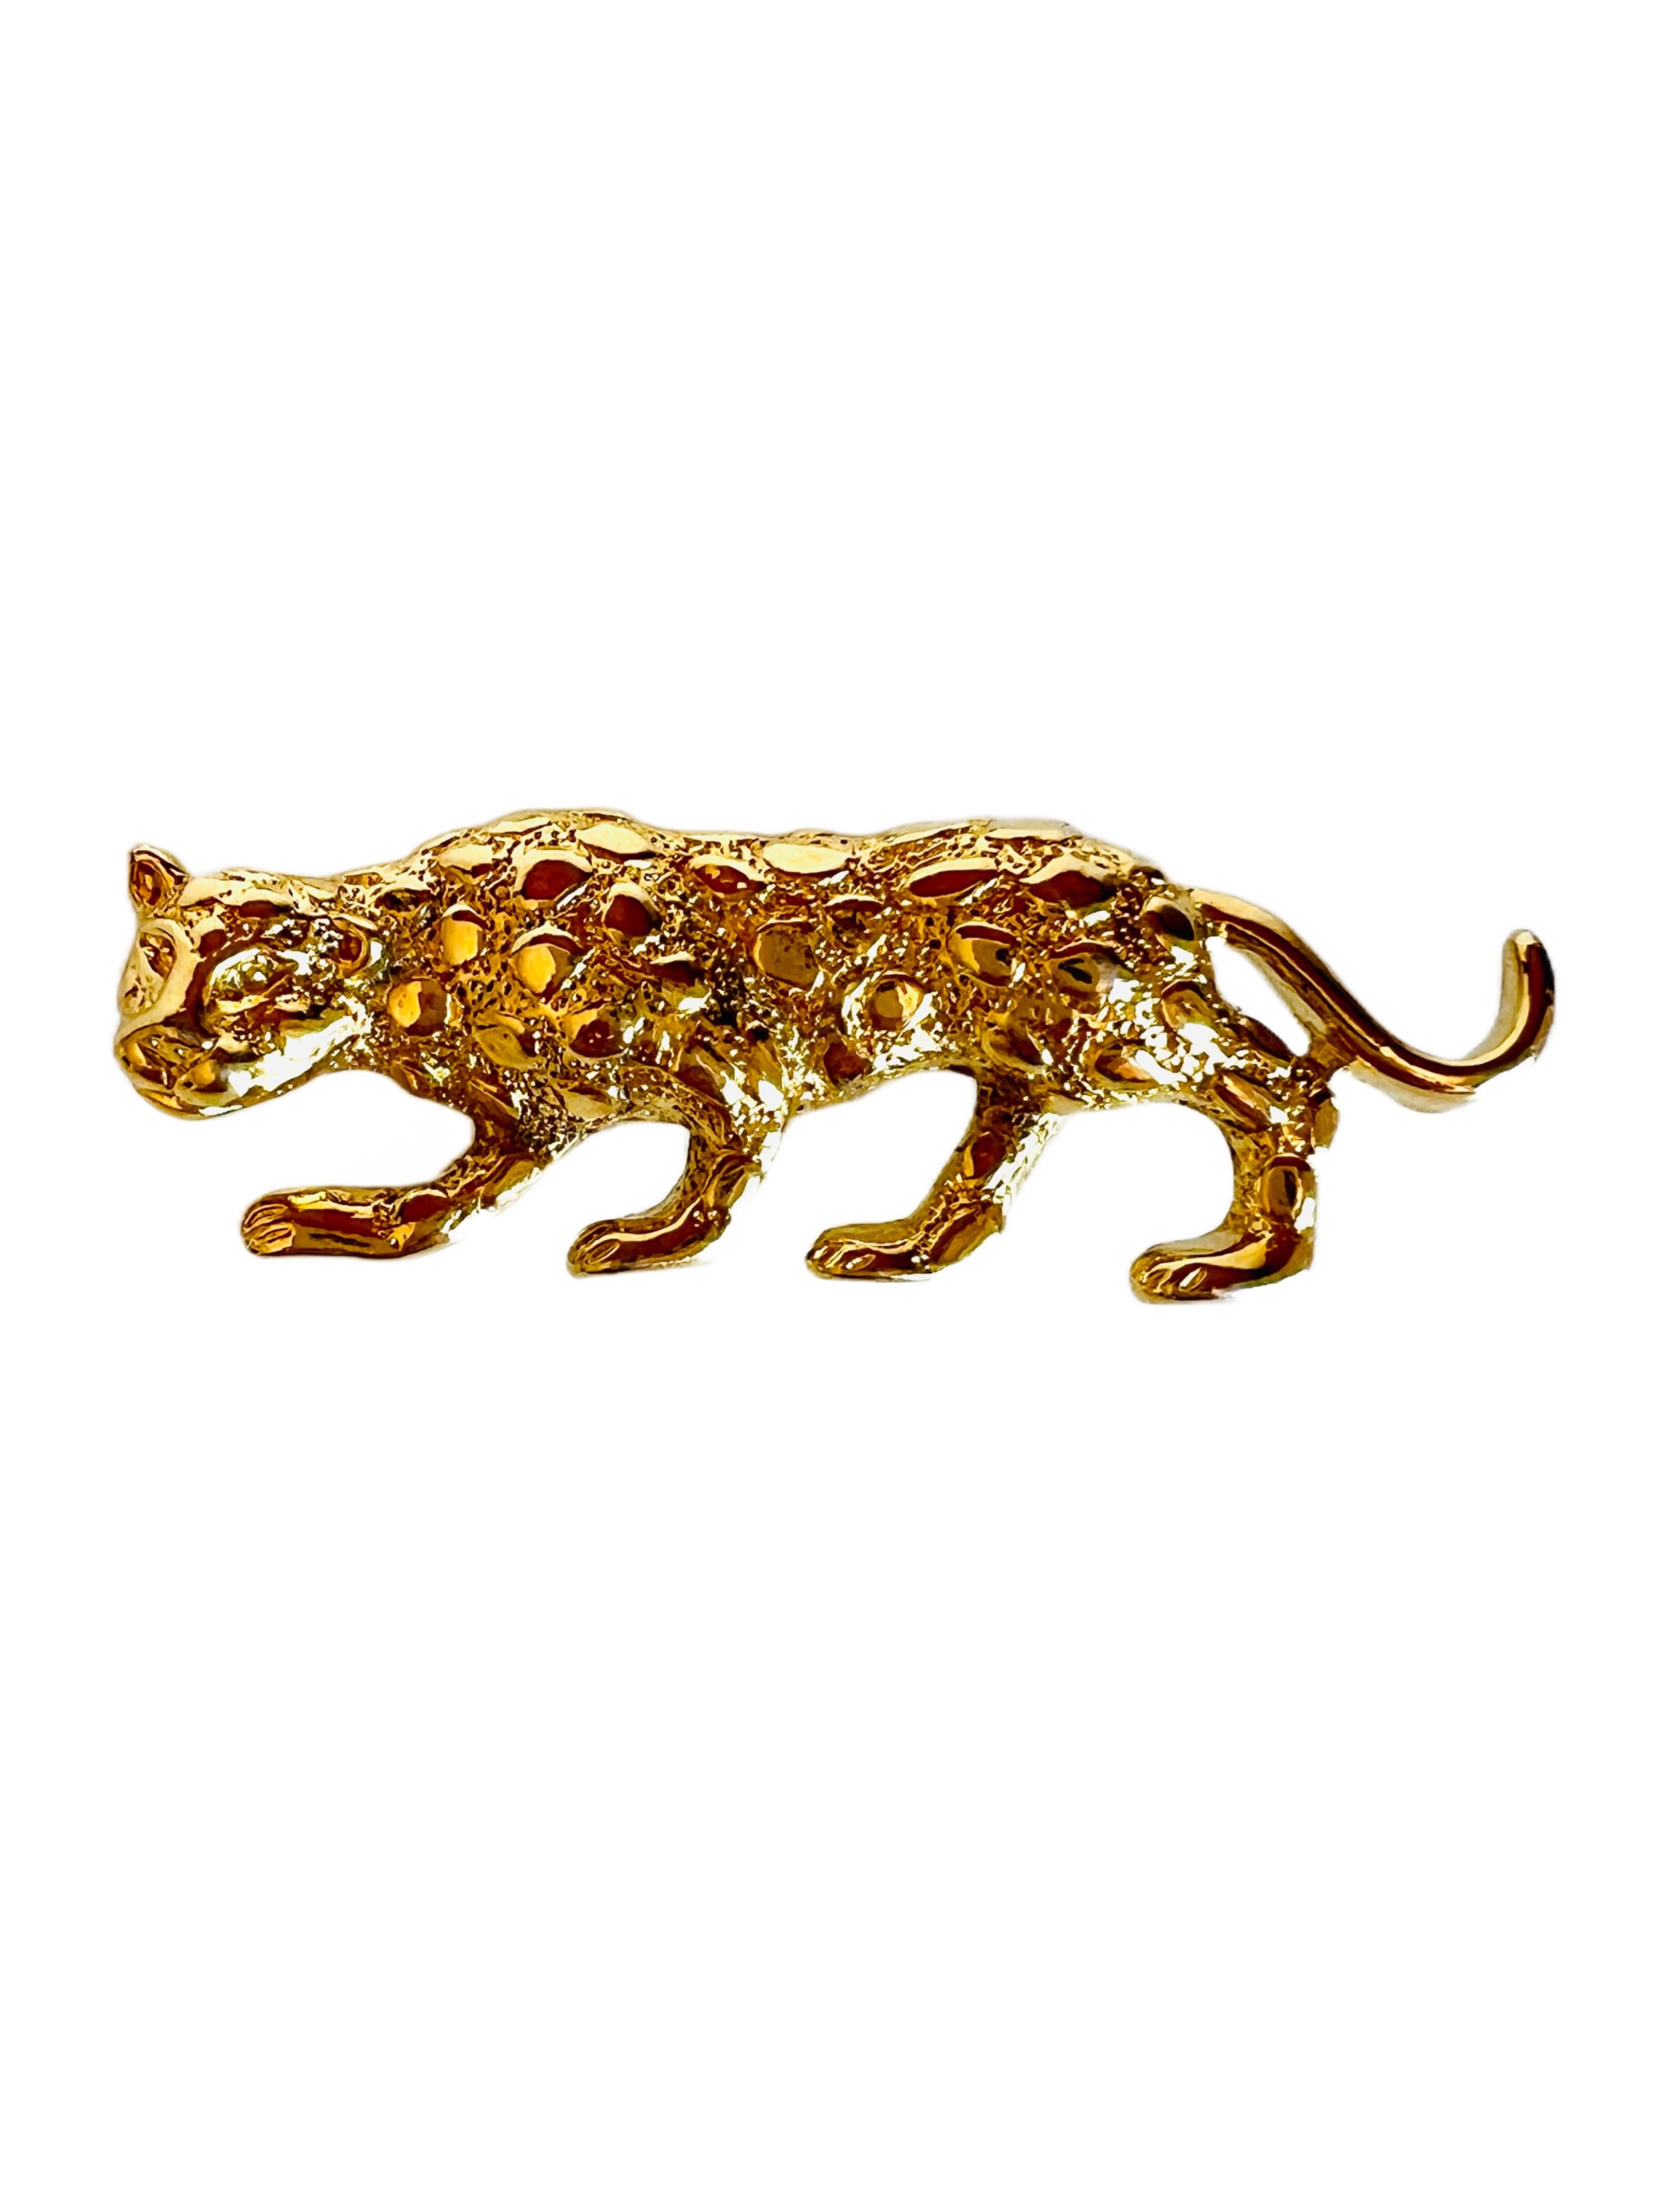 Vintage signed Gerry's figural crouching leopard brooch. 

Size: 2-1/4